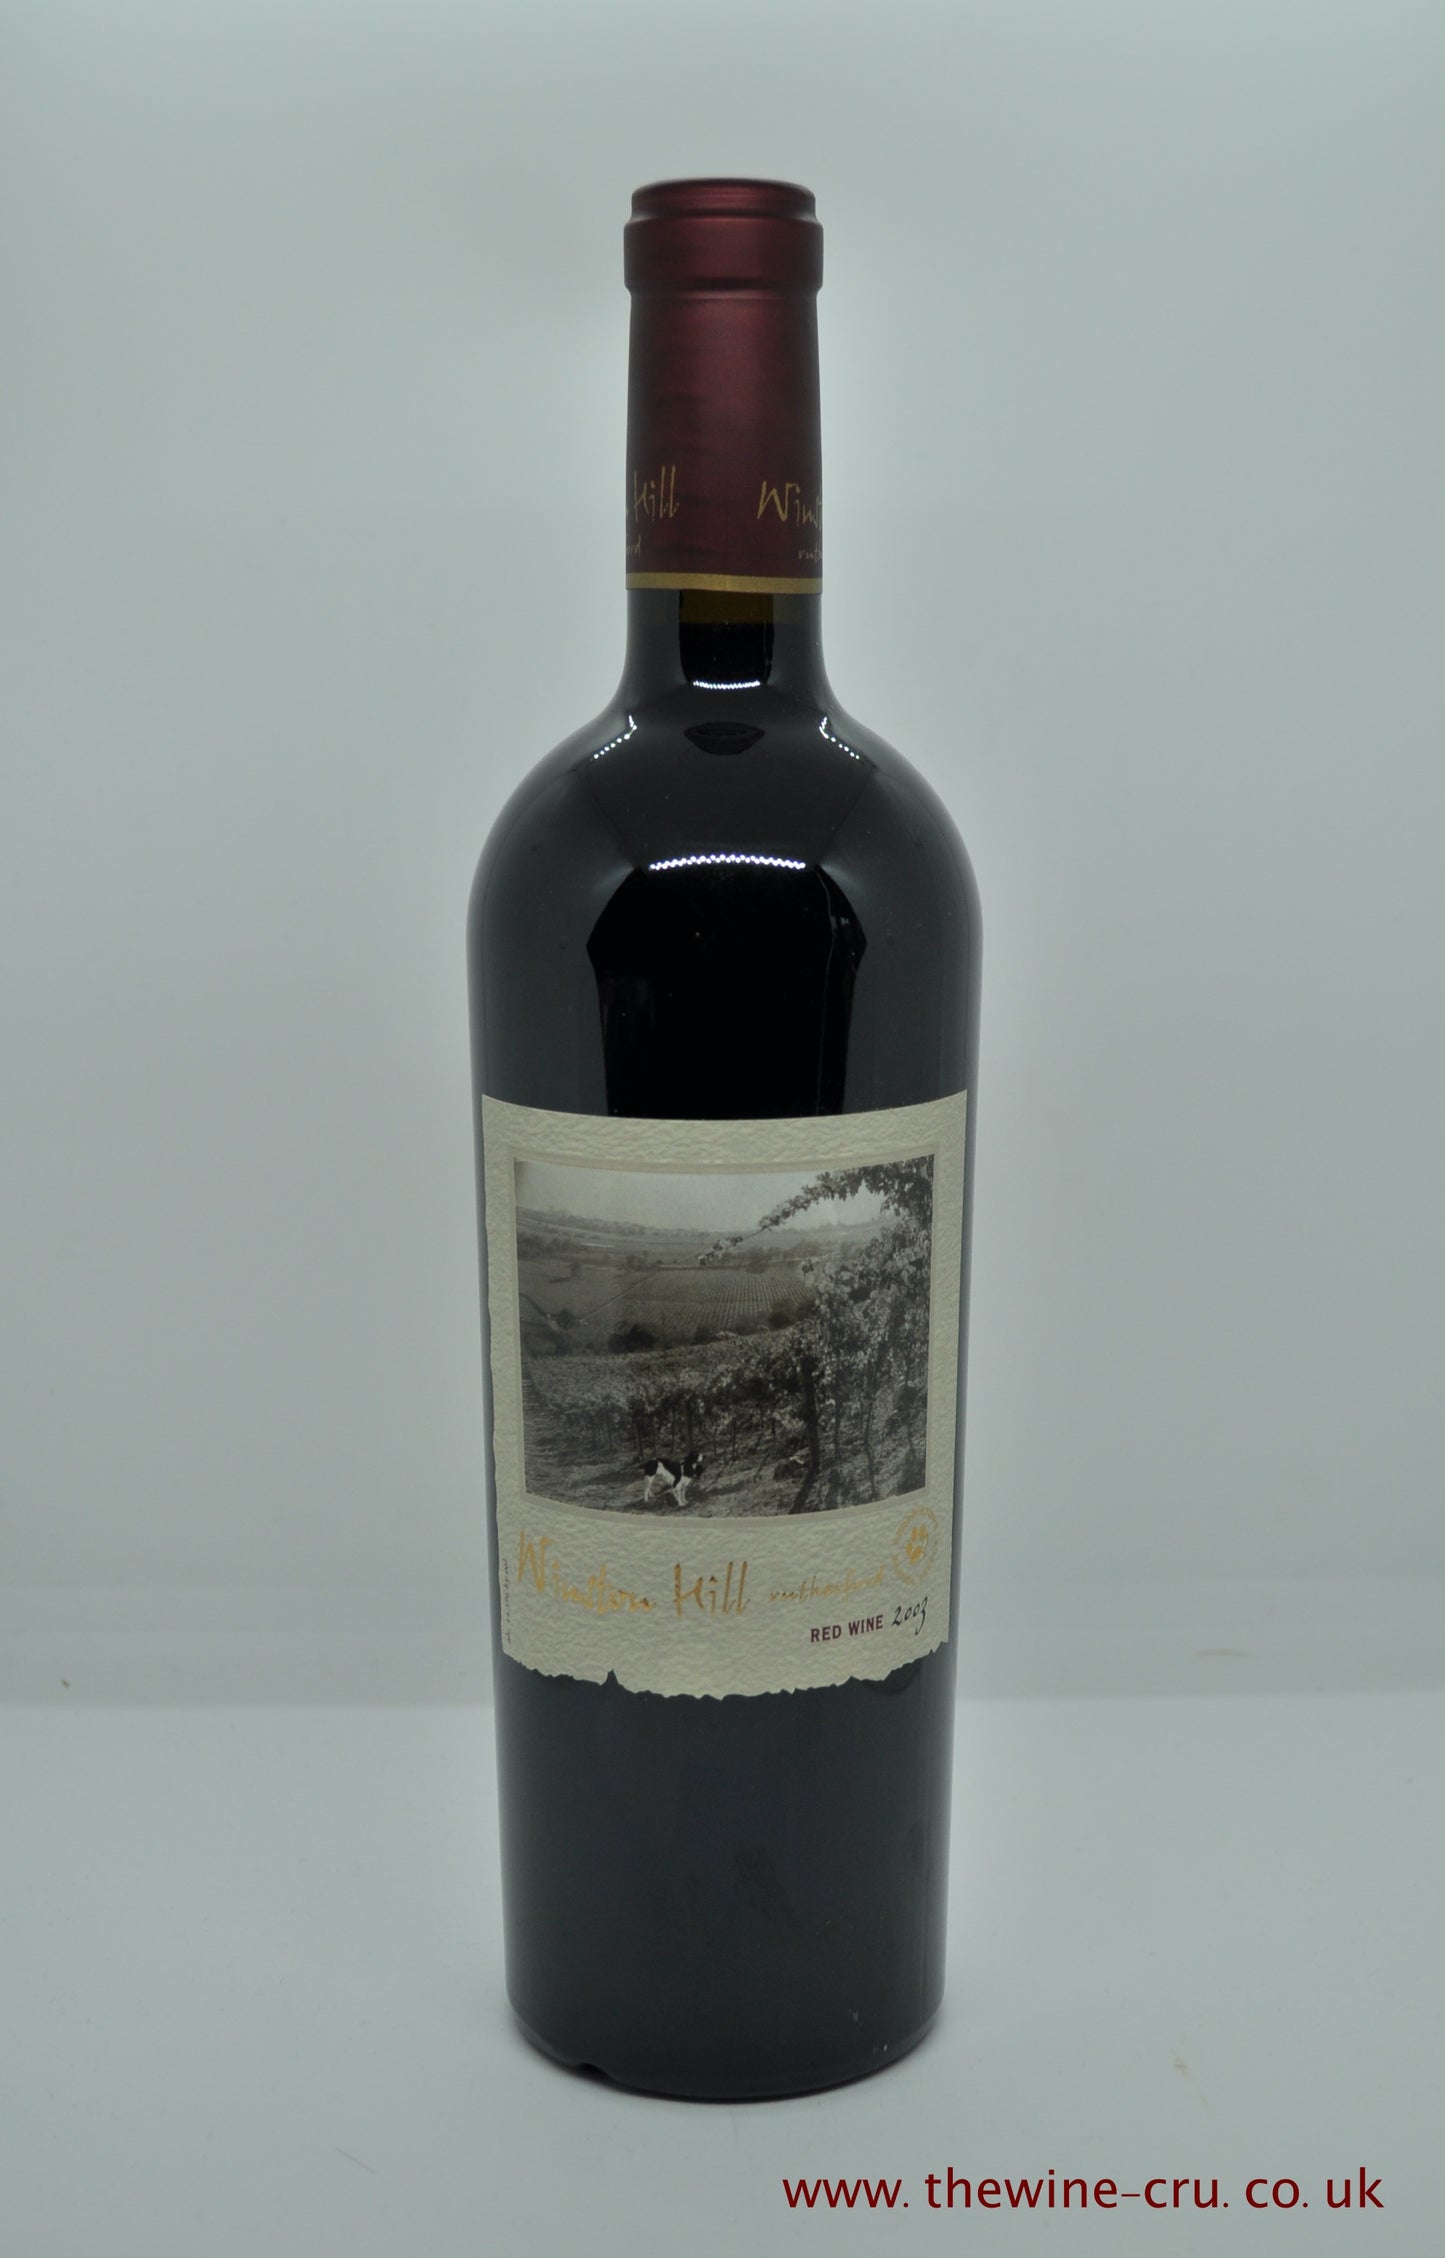 2003 vintage red wine. Frank Family Vineyard Winston Hill 2003. USA, California, Napa valley. The bottles are in excellent condition with the wine level in neck. Immediate delivery. Free local delivery. Gift wrapping available.